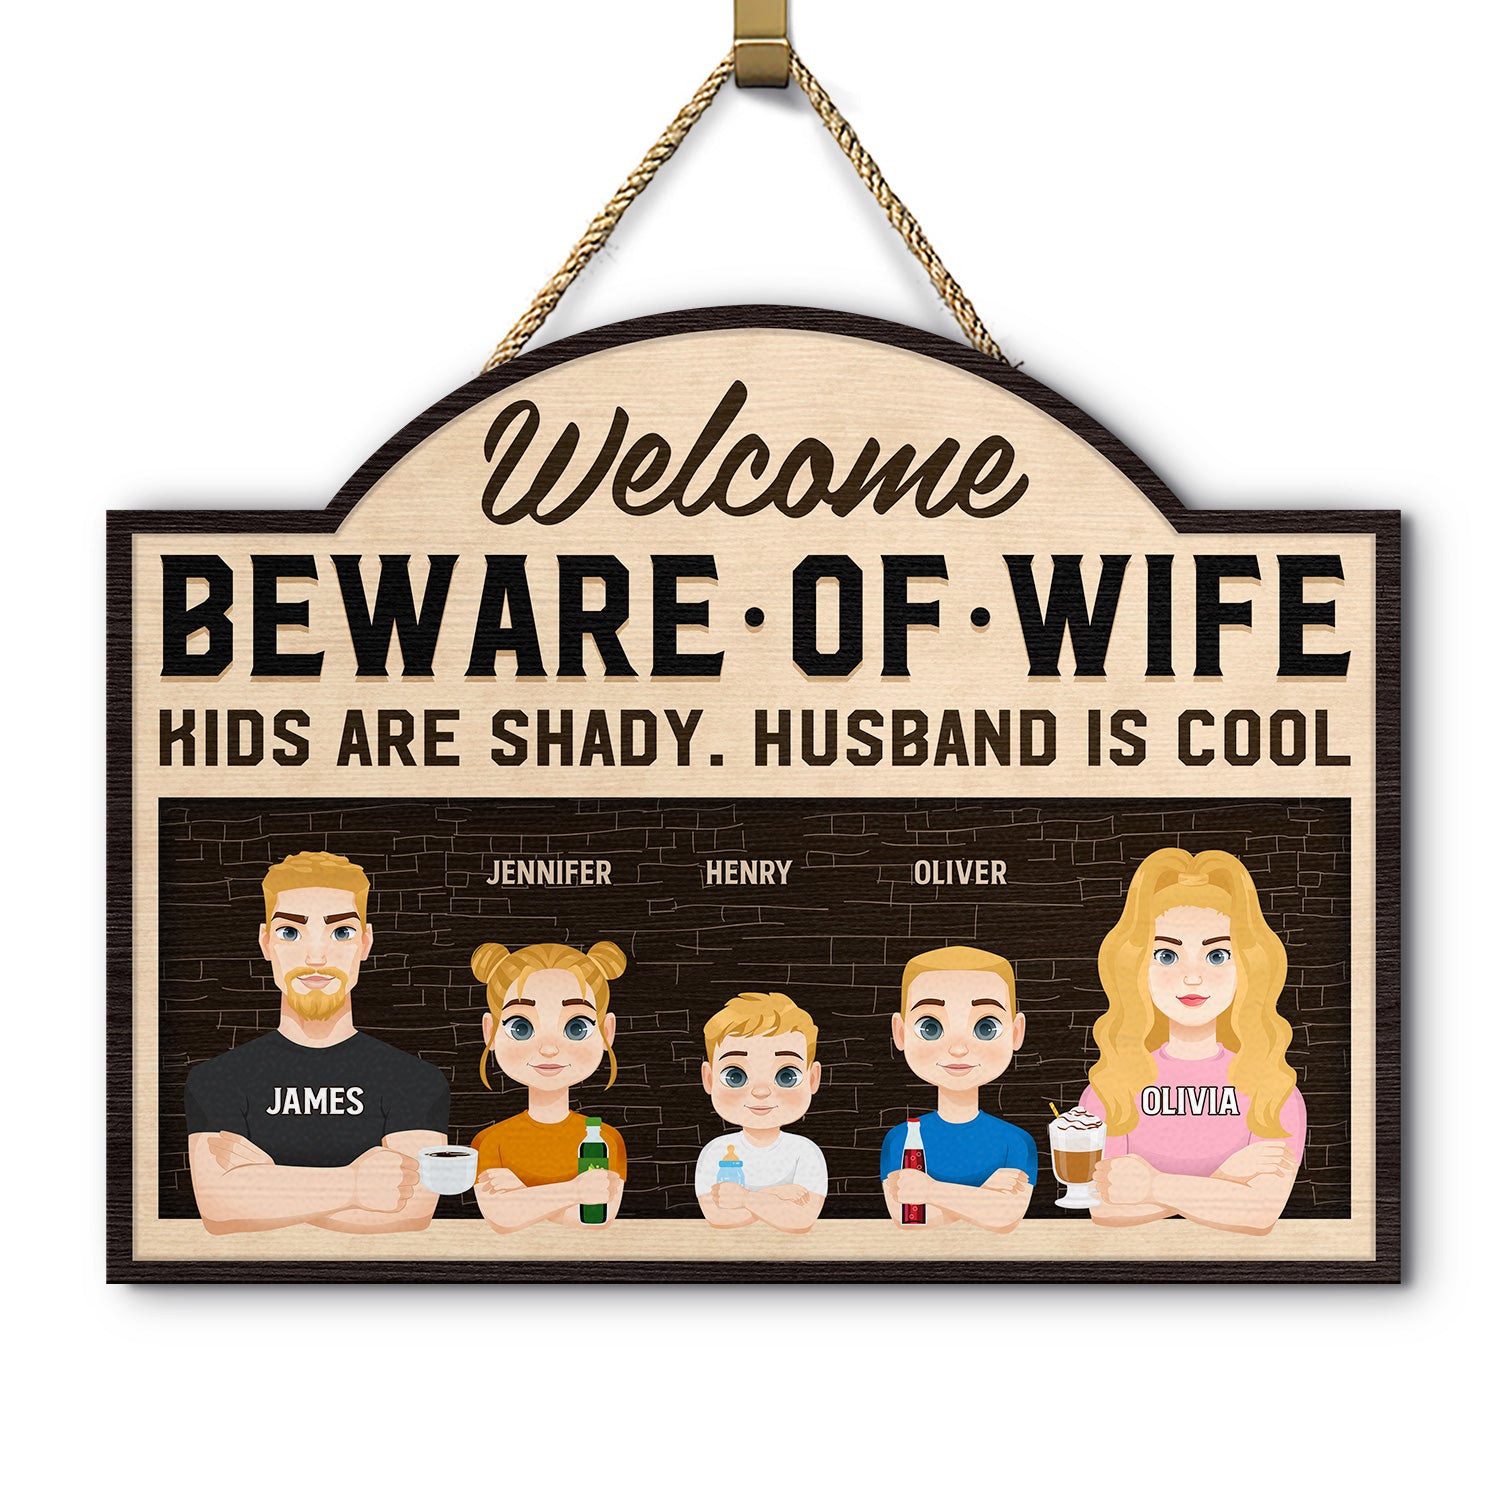 Kids Are Shady Husband Is Cool Beware Of Wife - Home Decor, Loving Gift For Couples, Husband, Wife, Family - Personalized Custom Shaped Wood Sign